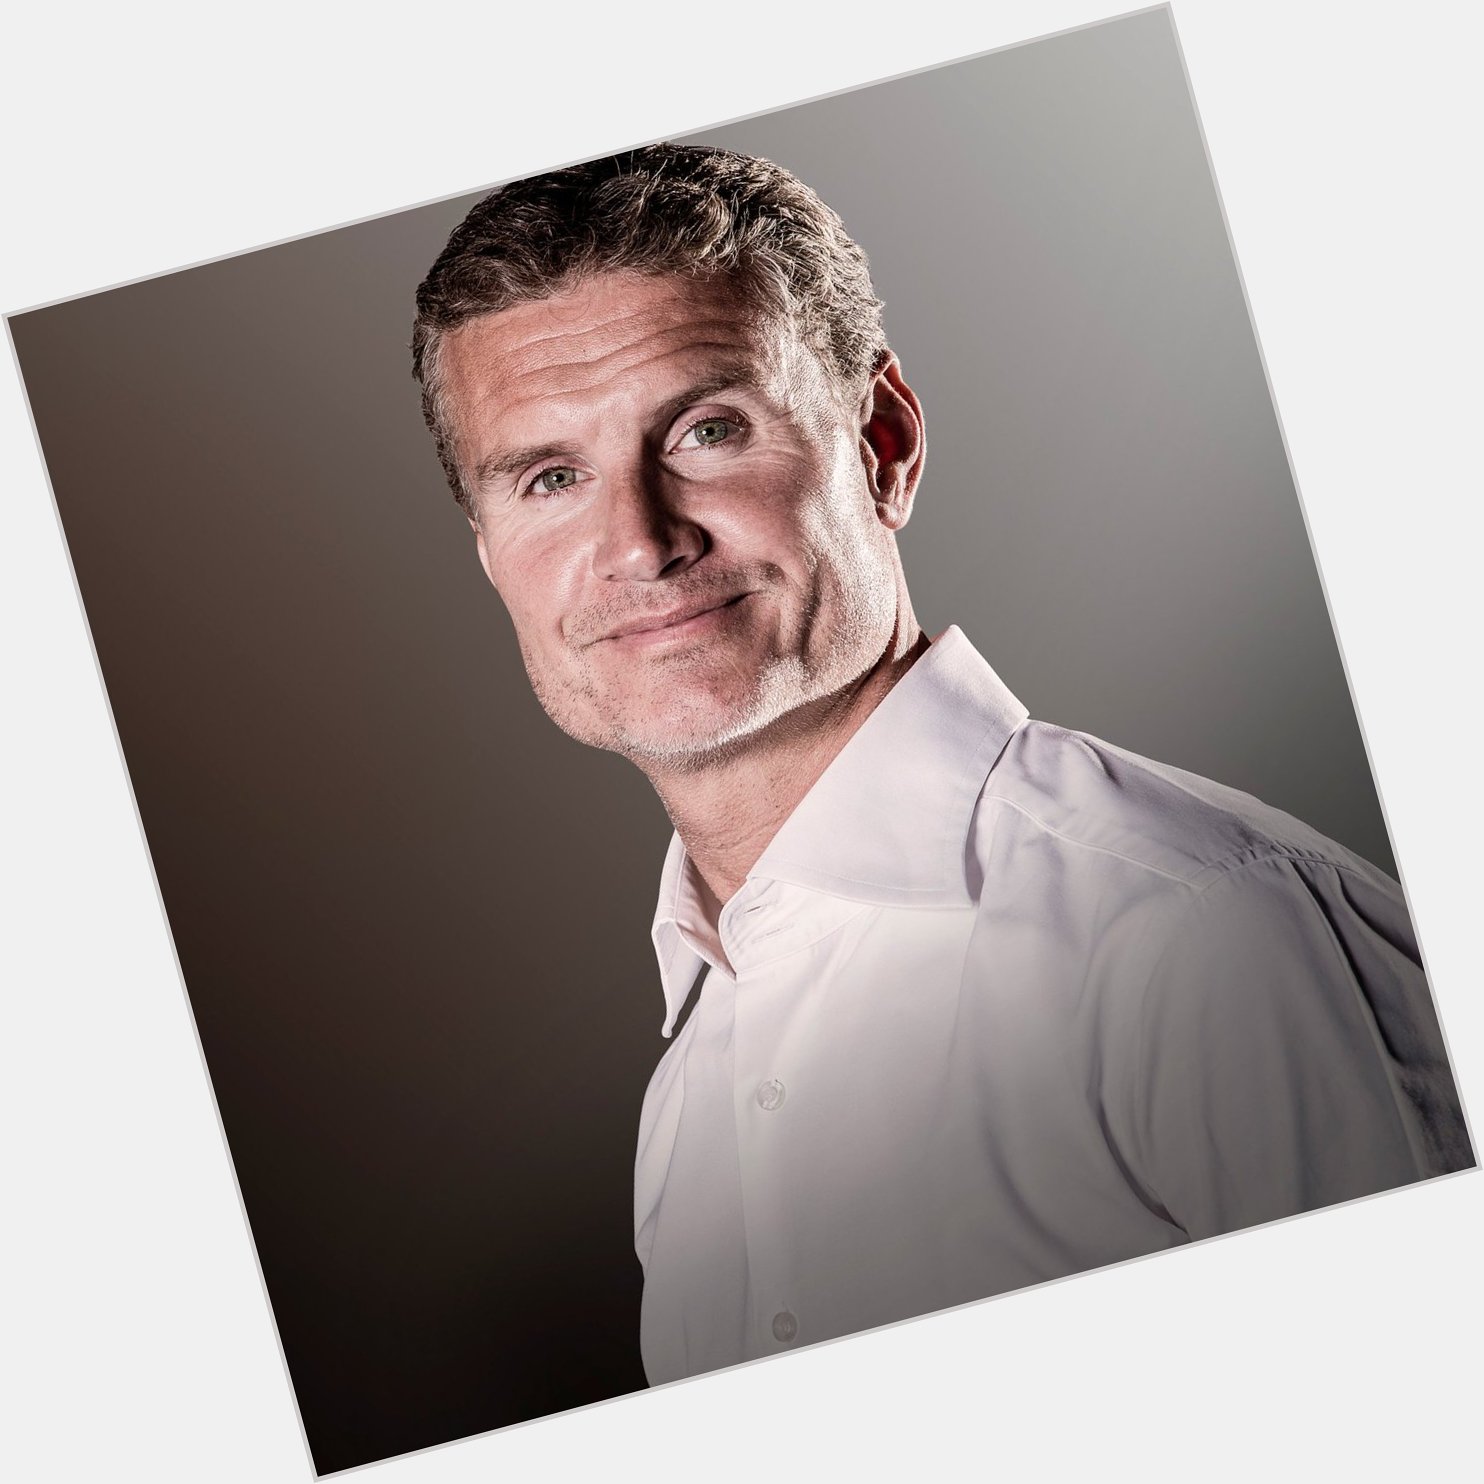 Happy Birthday David Coulthard - all the best from all of us at CSA Celebrity Speakers Germany! 